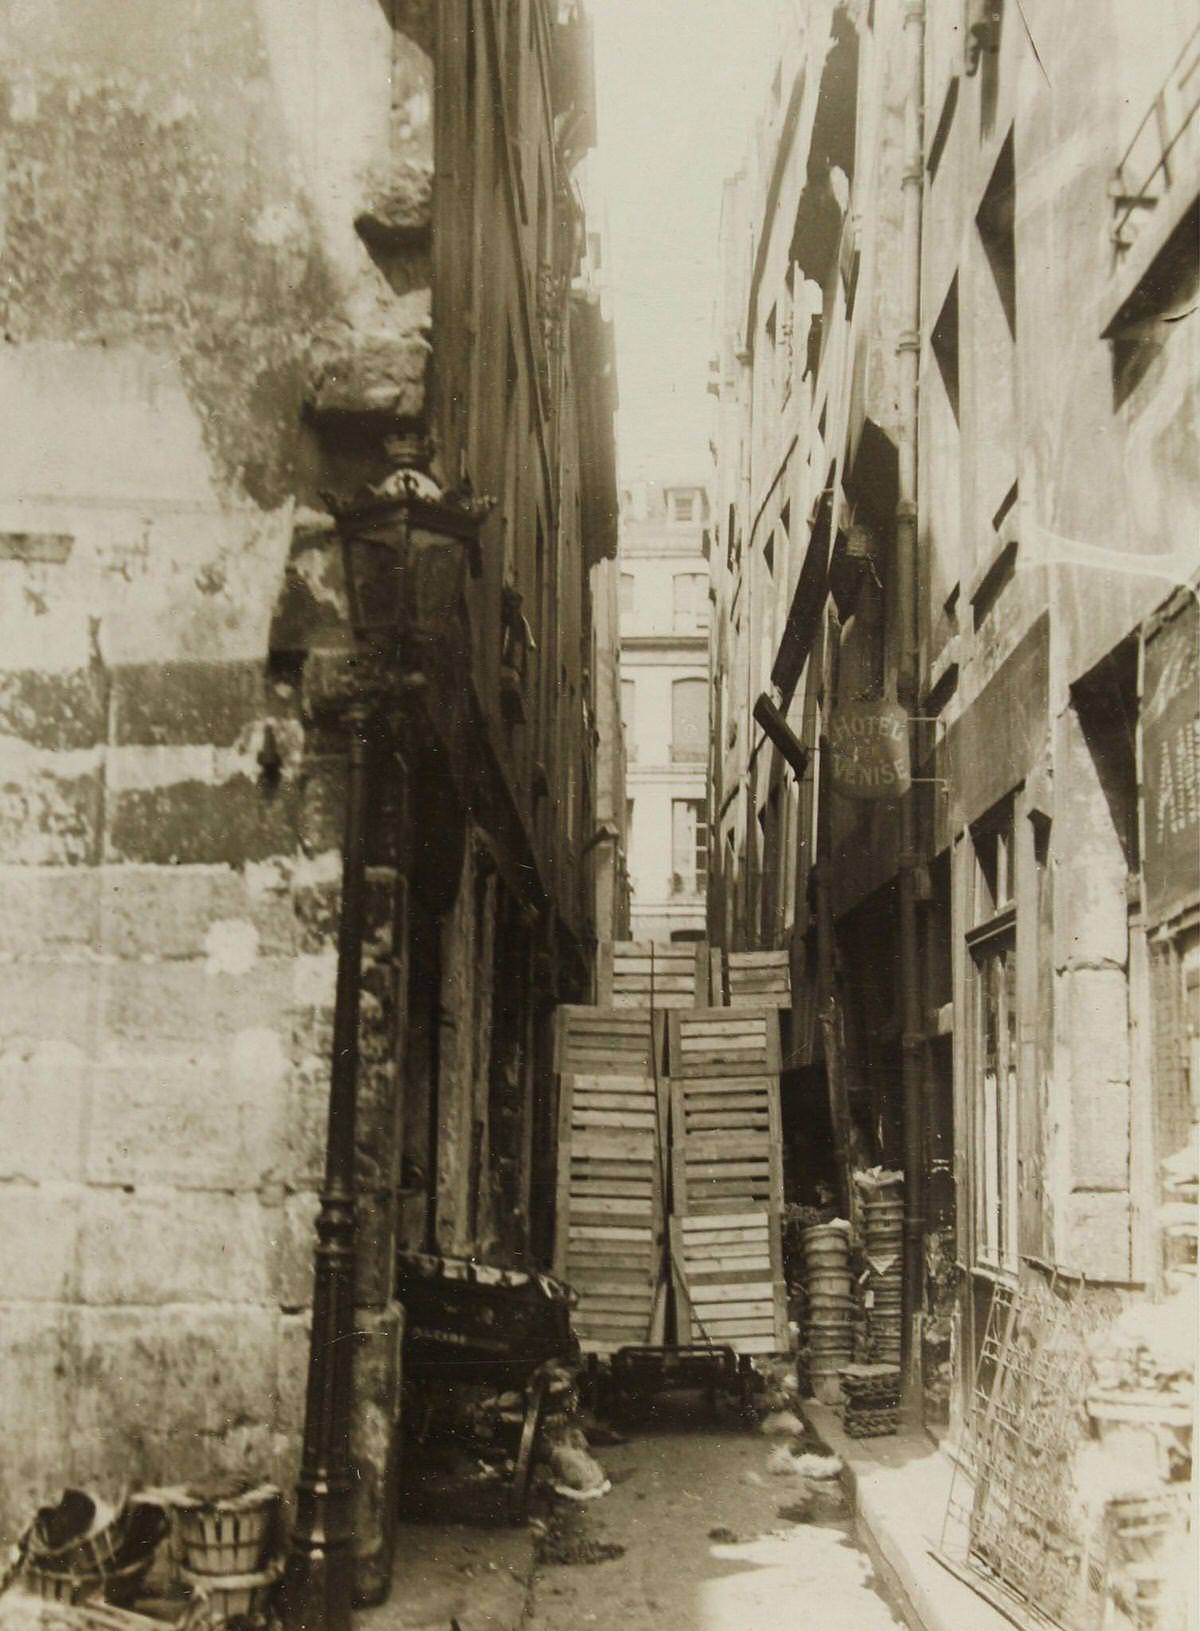 Transport of goods through the narrow streets to Les Halles - the 'Belly of Paris', 1930